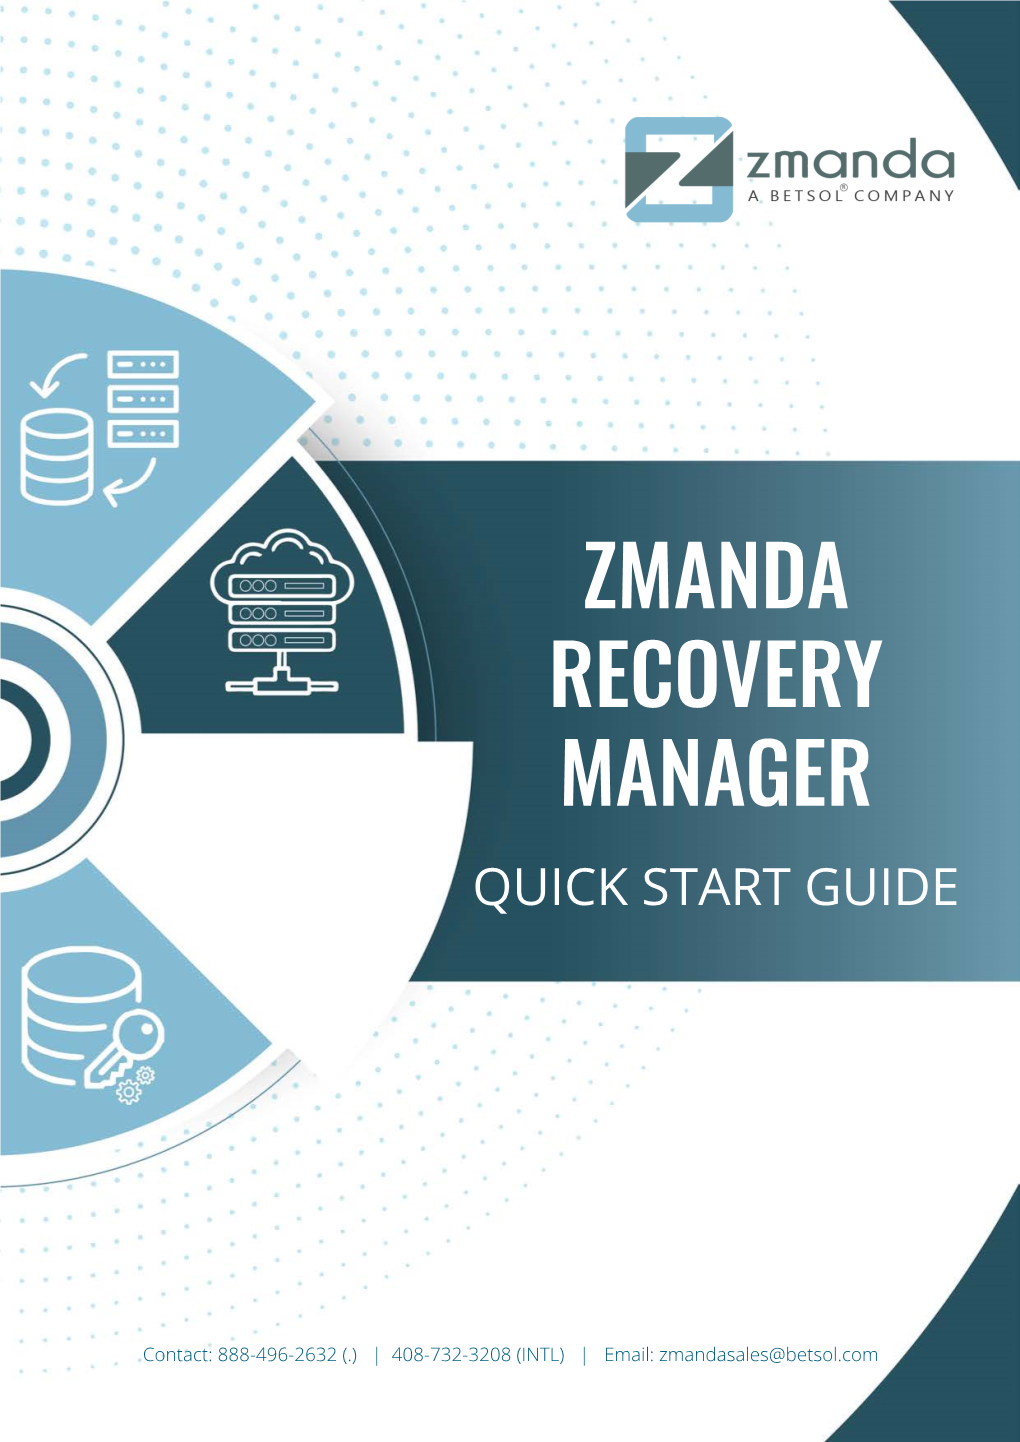 Zmanda Recovery Manager Quick Start Guide